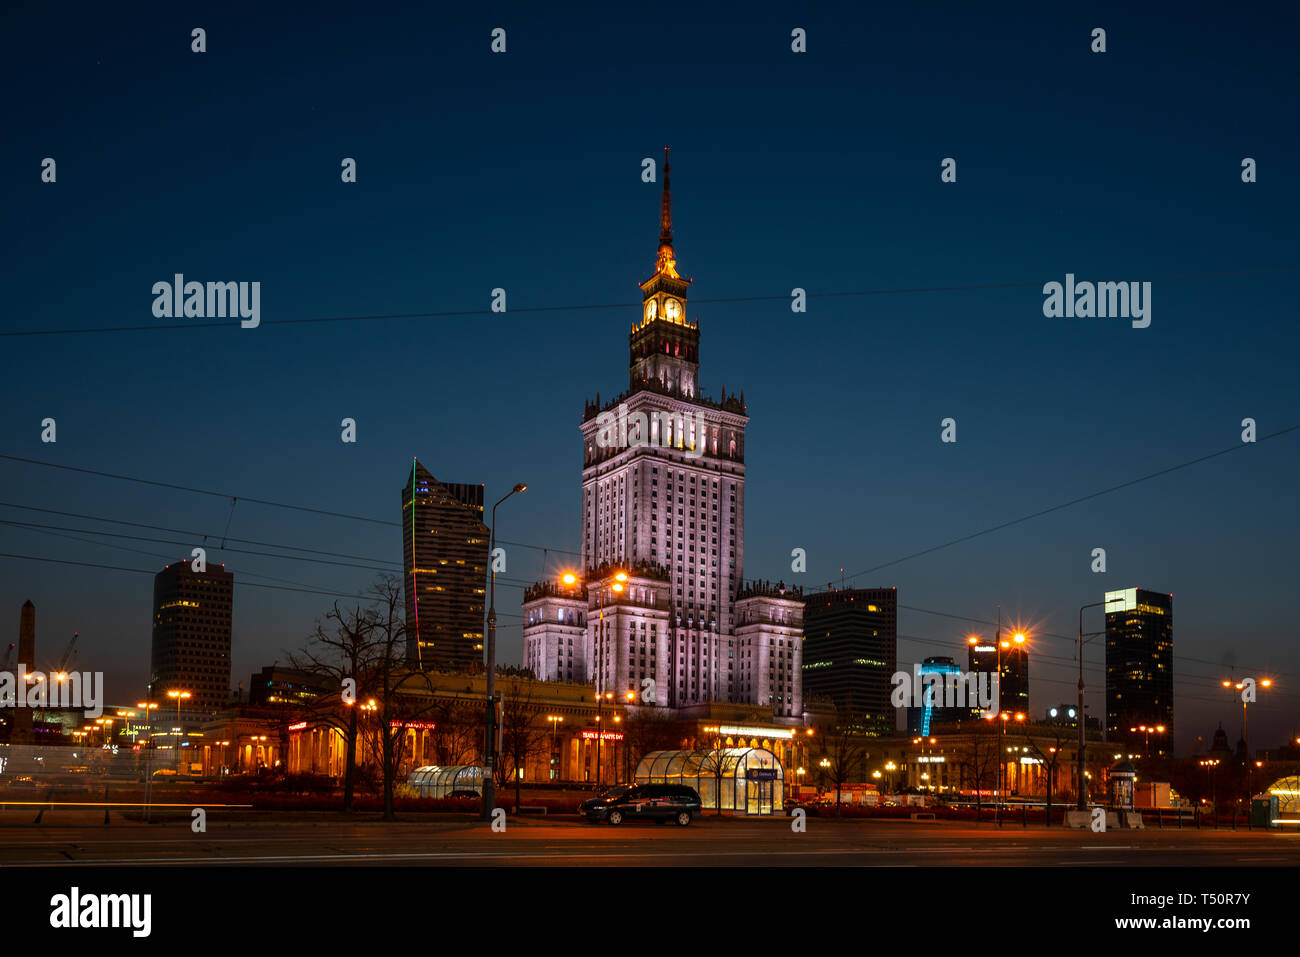 Warsaw, Poland. April, 2018. A view of  the Palace of Culture and Science at night Stock Photo